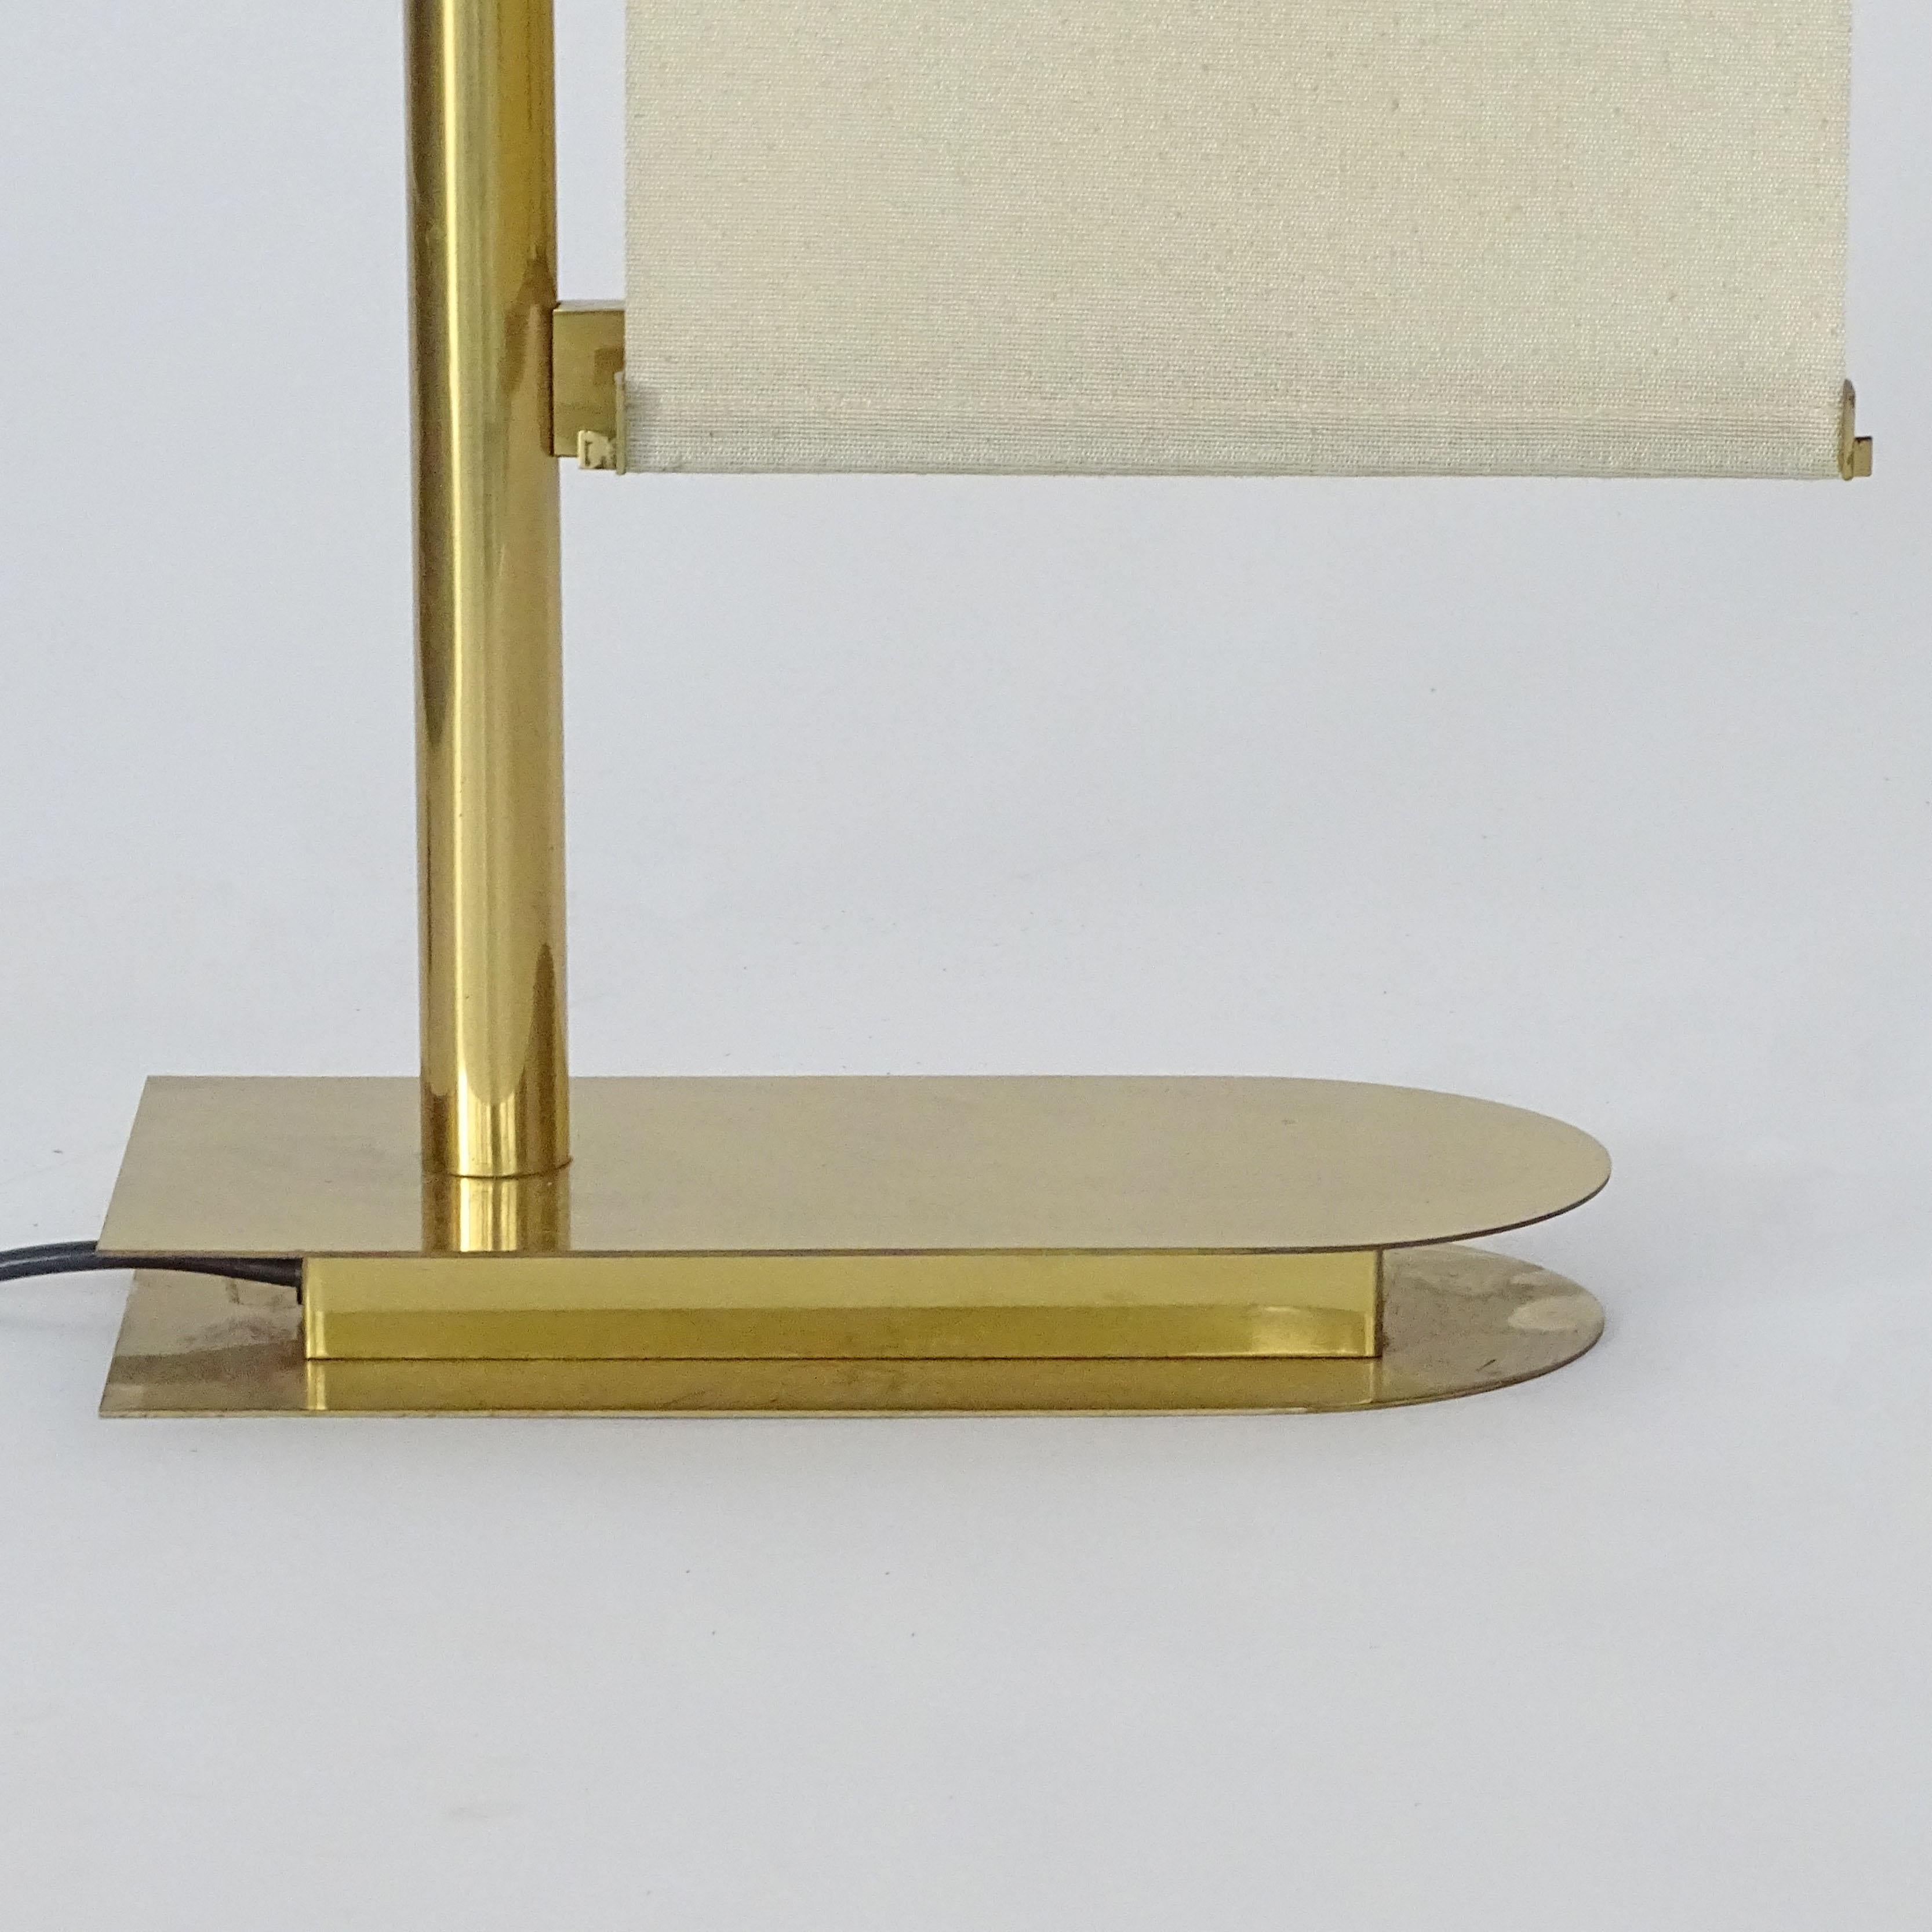 Stunning Pietro Chiesa 0312 model Floor Lamp in brass and linen textile for Fontana Arte.
This is a 1970s model that was Originally designed in 1933.
Superb vintage condition!
